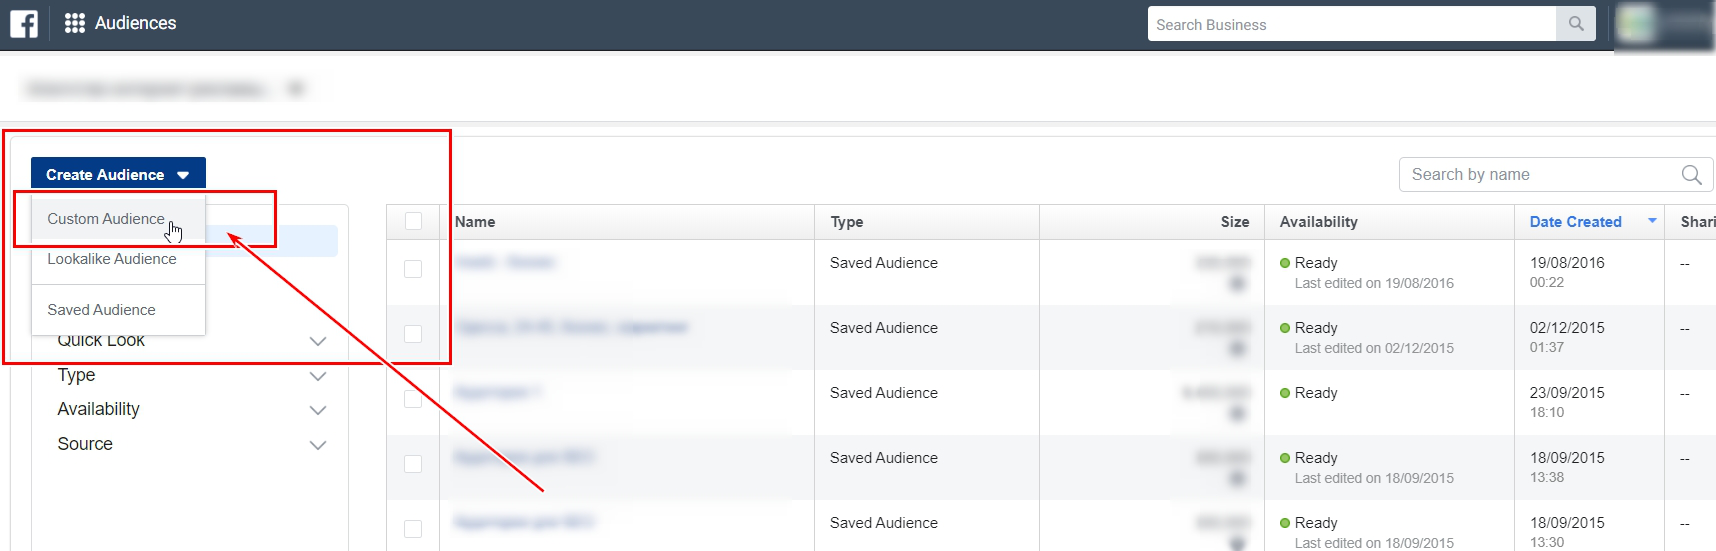 Creating audience in Facebook Ads Manager